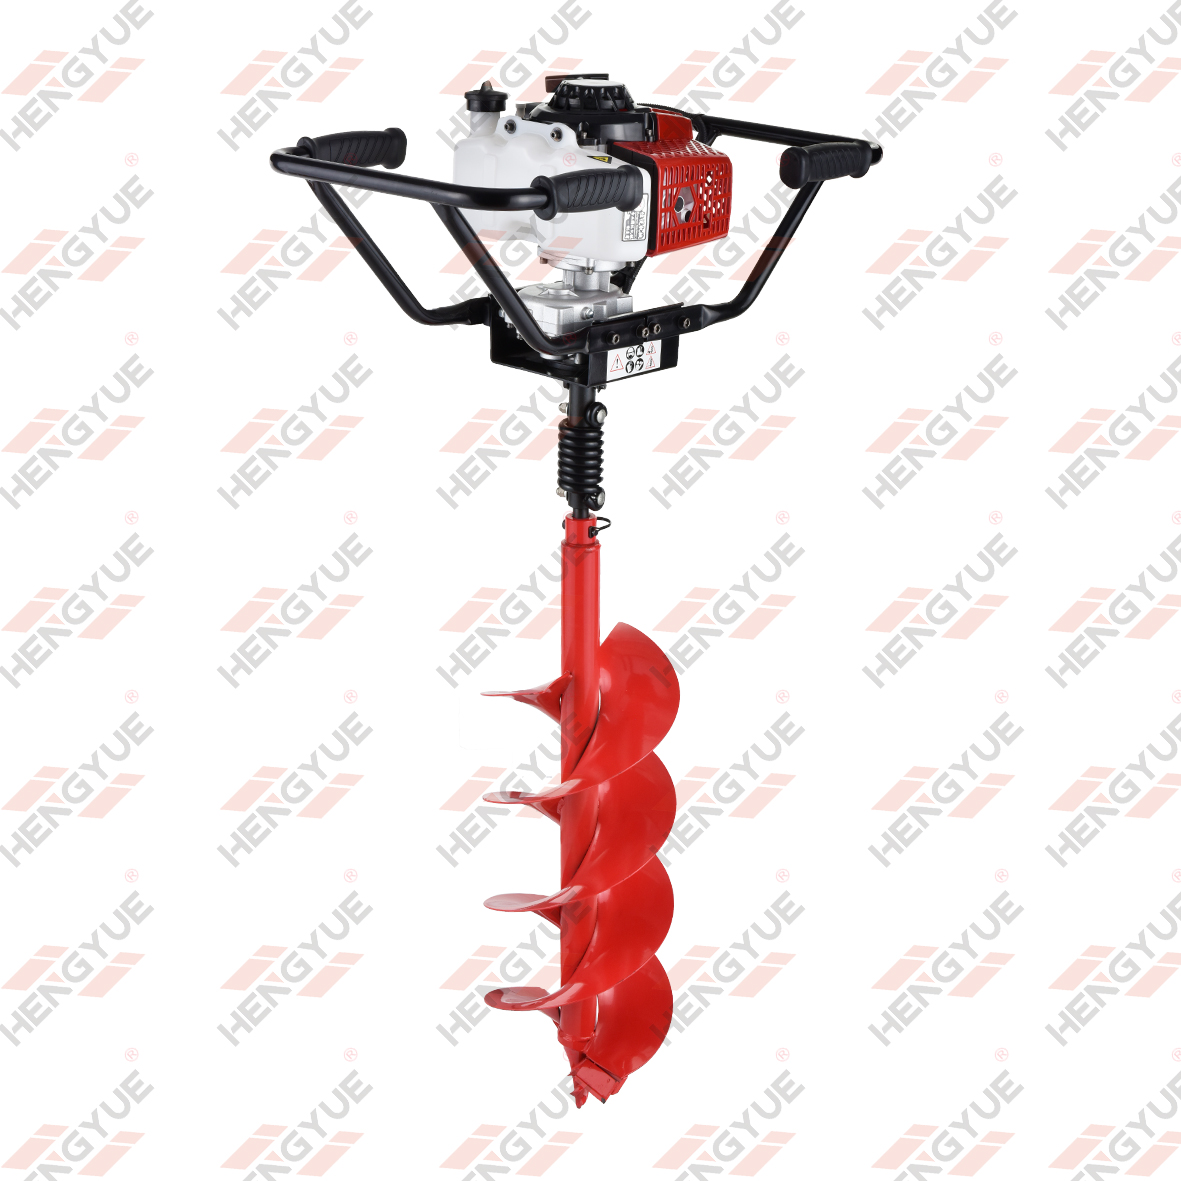 Powered by HONDA GX50 engine popular 2 man operated model earth auger